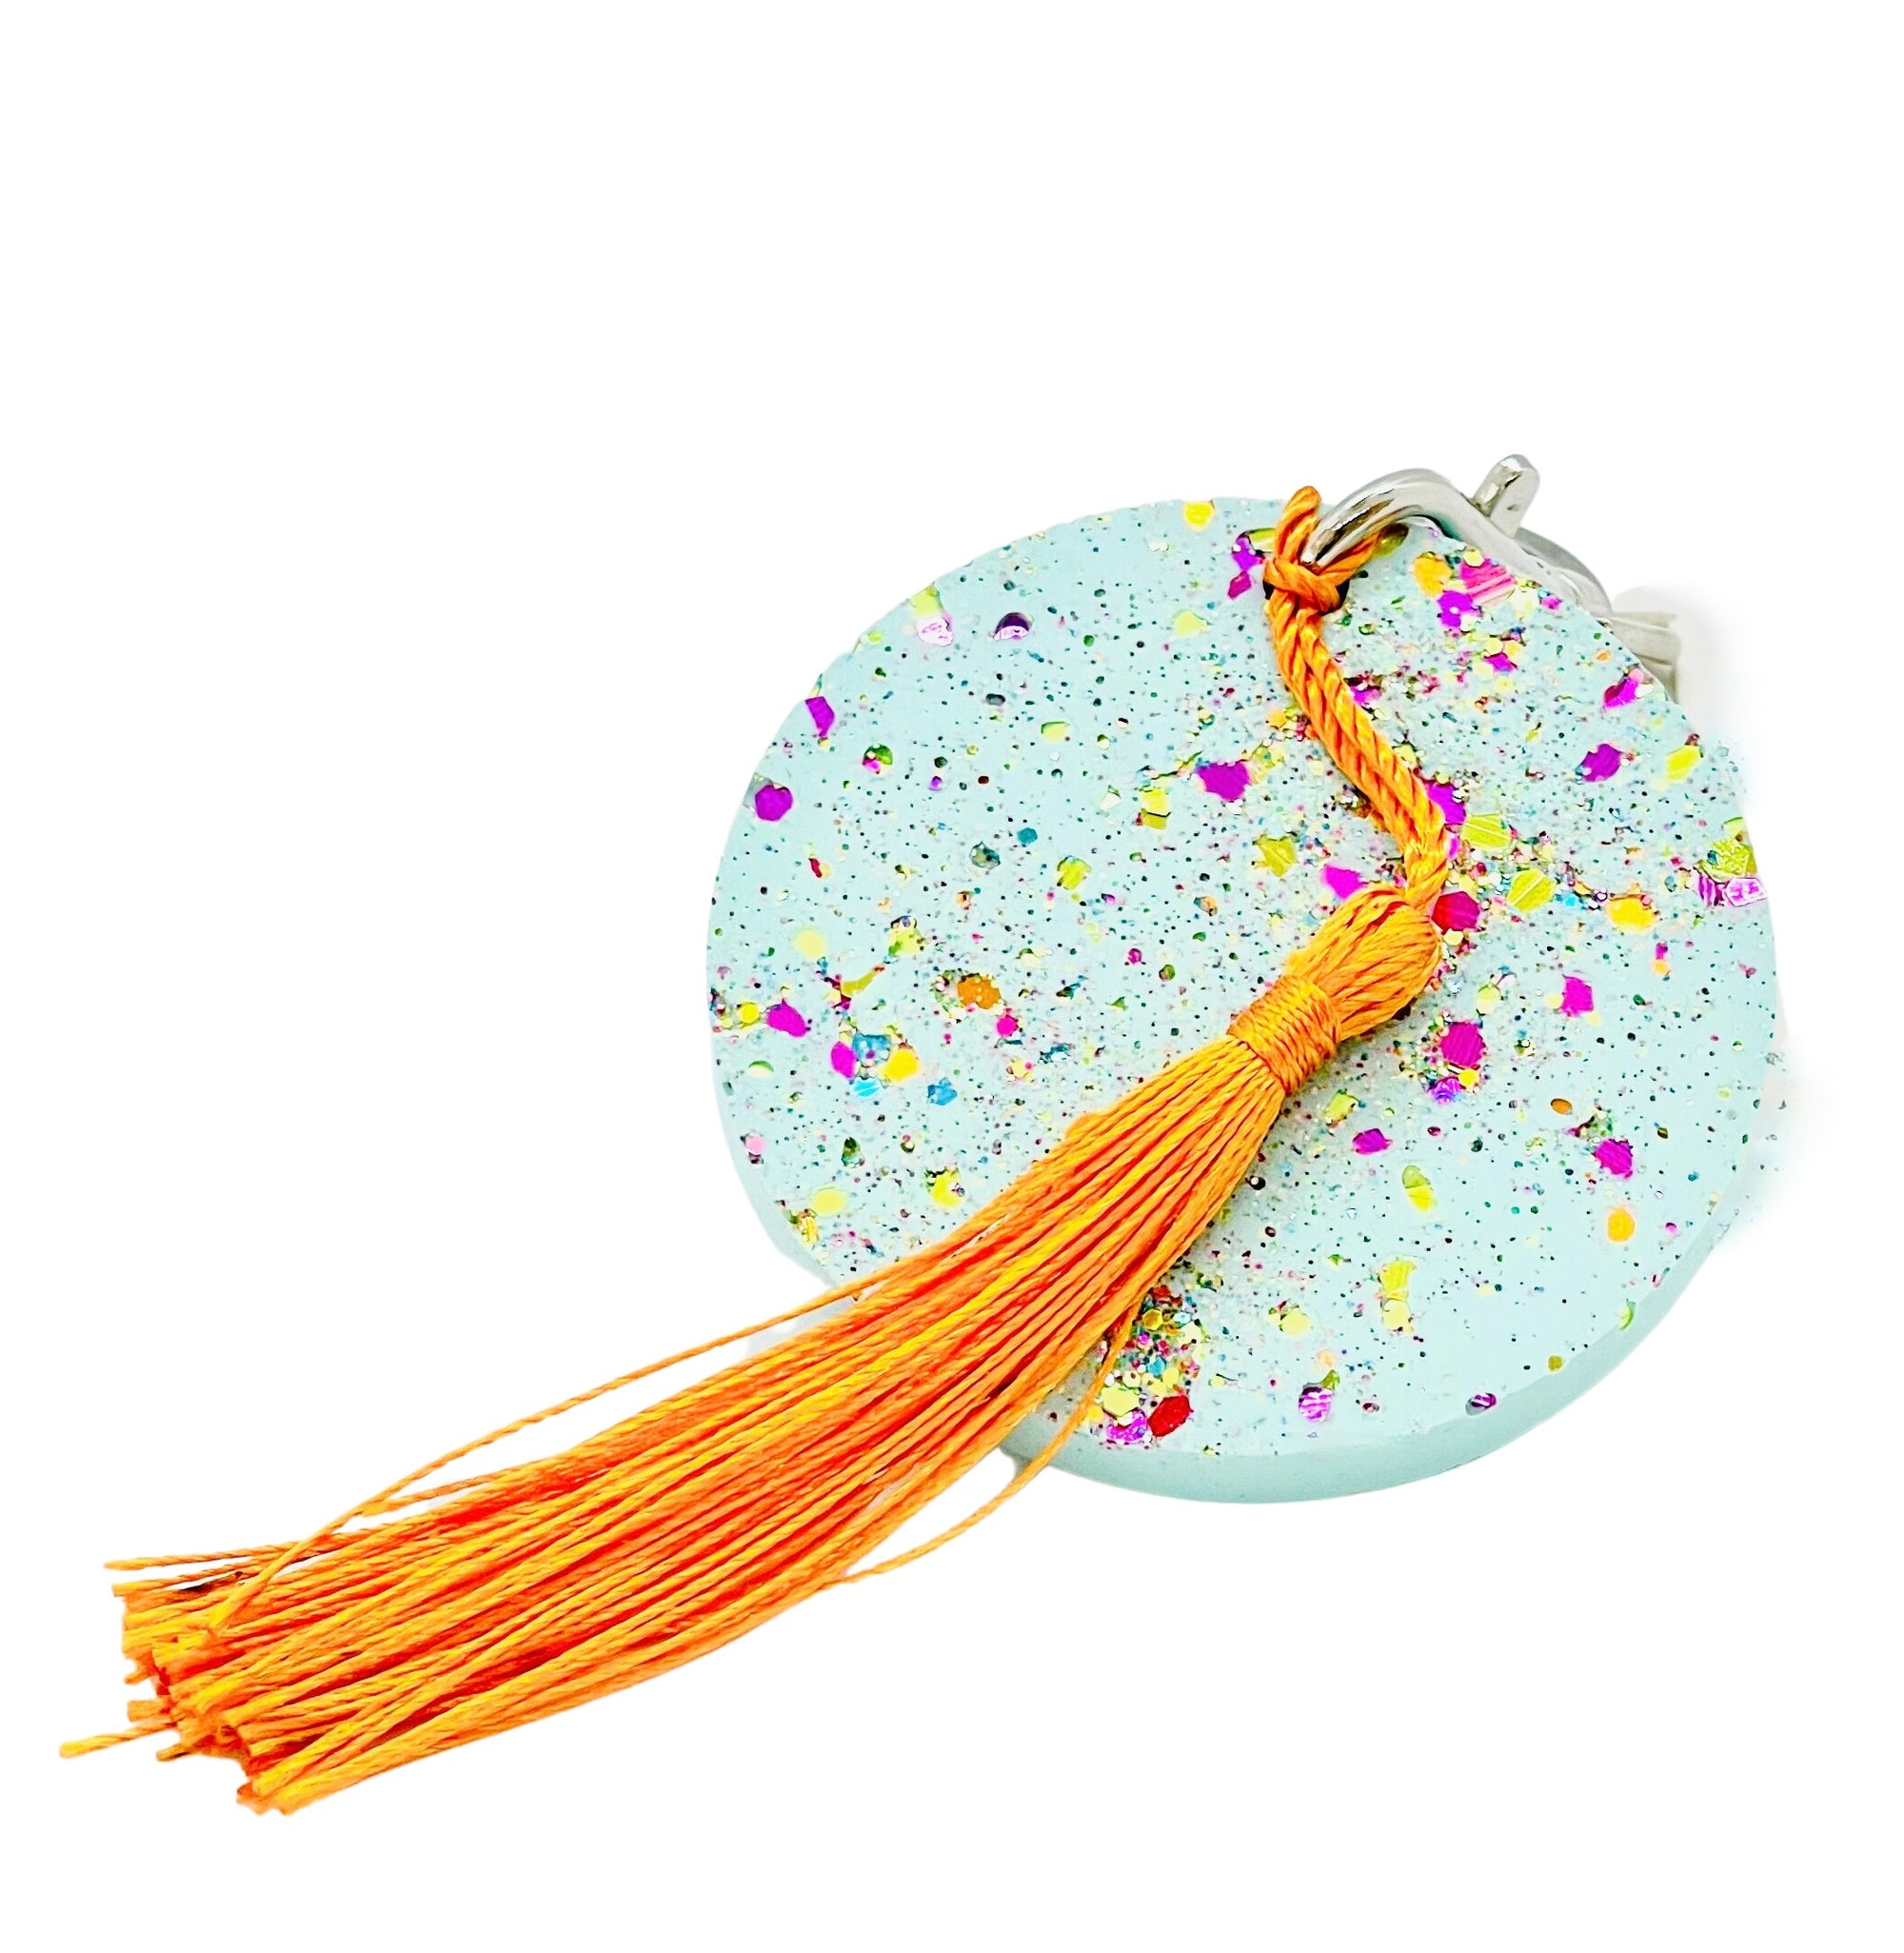 A round Jesmonite disc keyring measuring 6cm in diameter coloured with turquoise pigment and sprinkled with rainbow glitter.